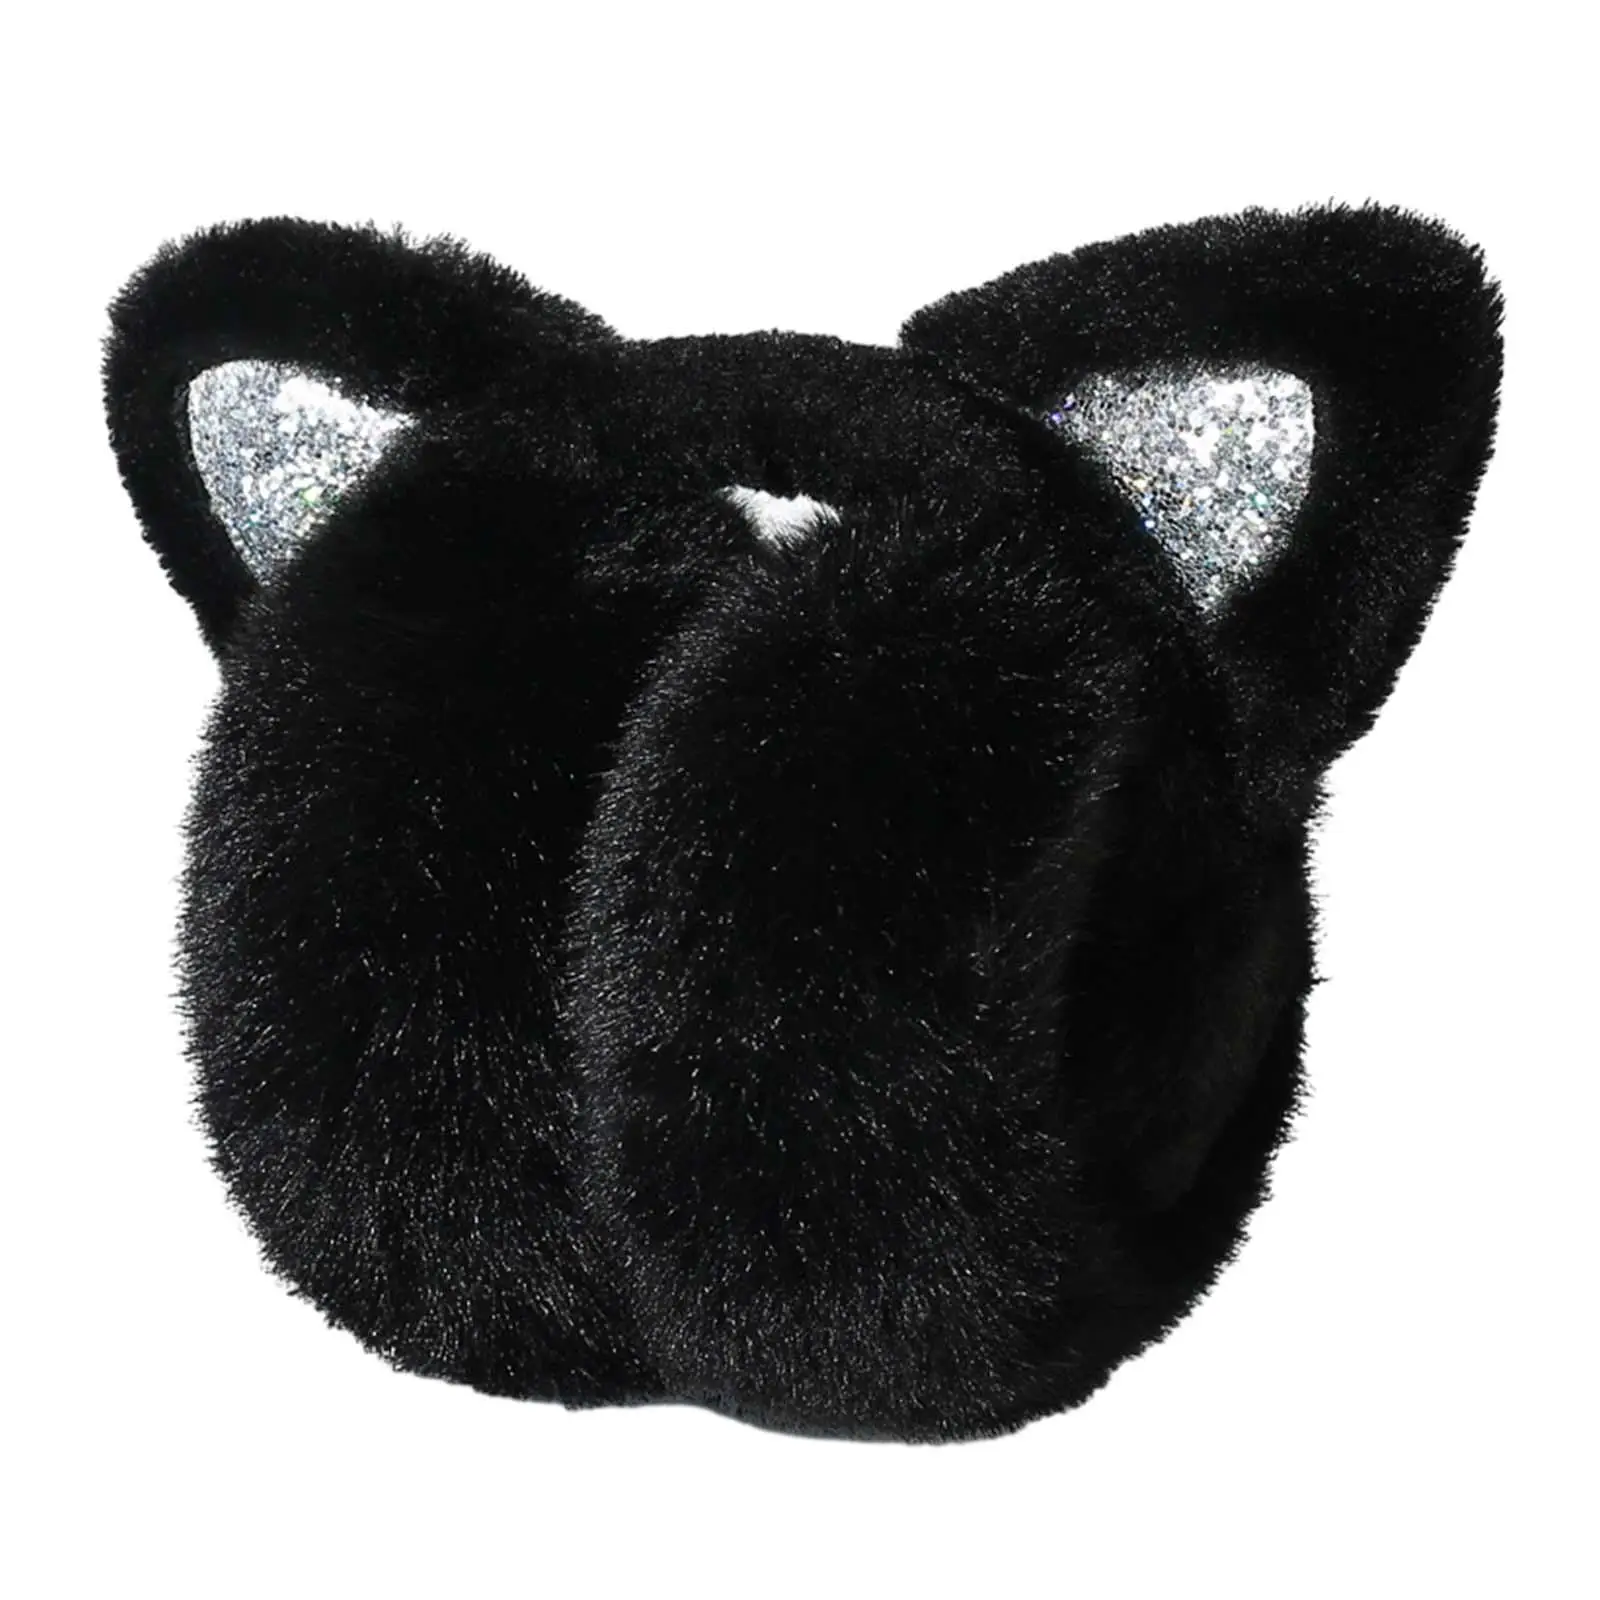 Winter Ear Muffs Folded Comfortable Warm Women Earmuffs Ear Warmers Ear Cover for Skating Cold Weather Traveling Outdoor Riding